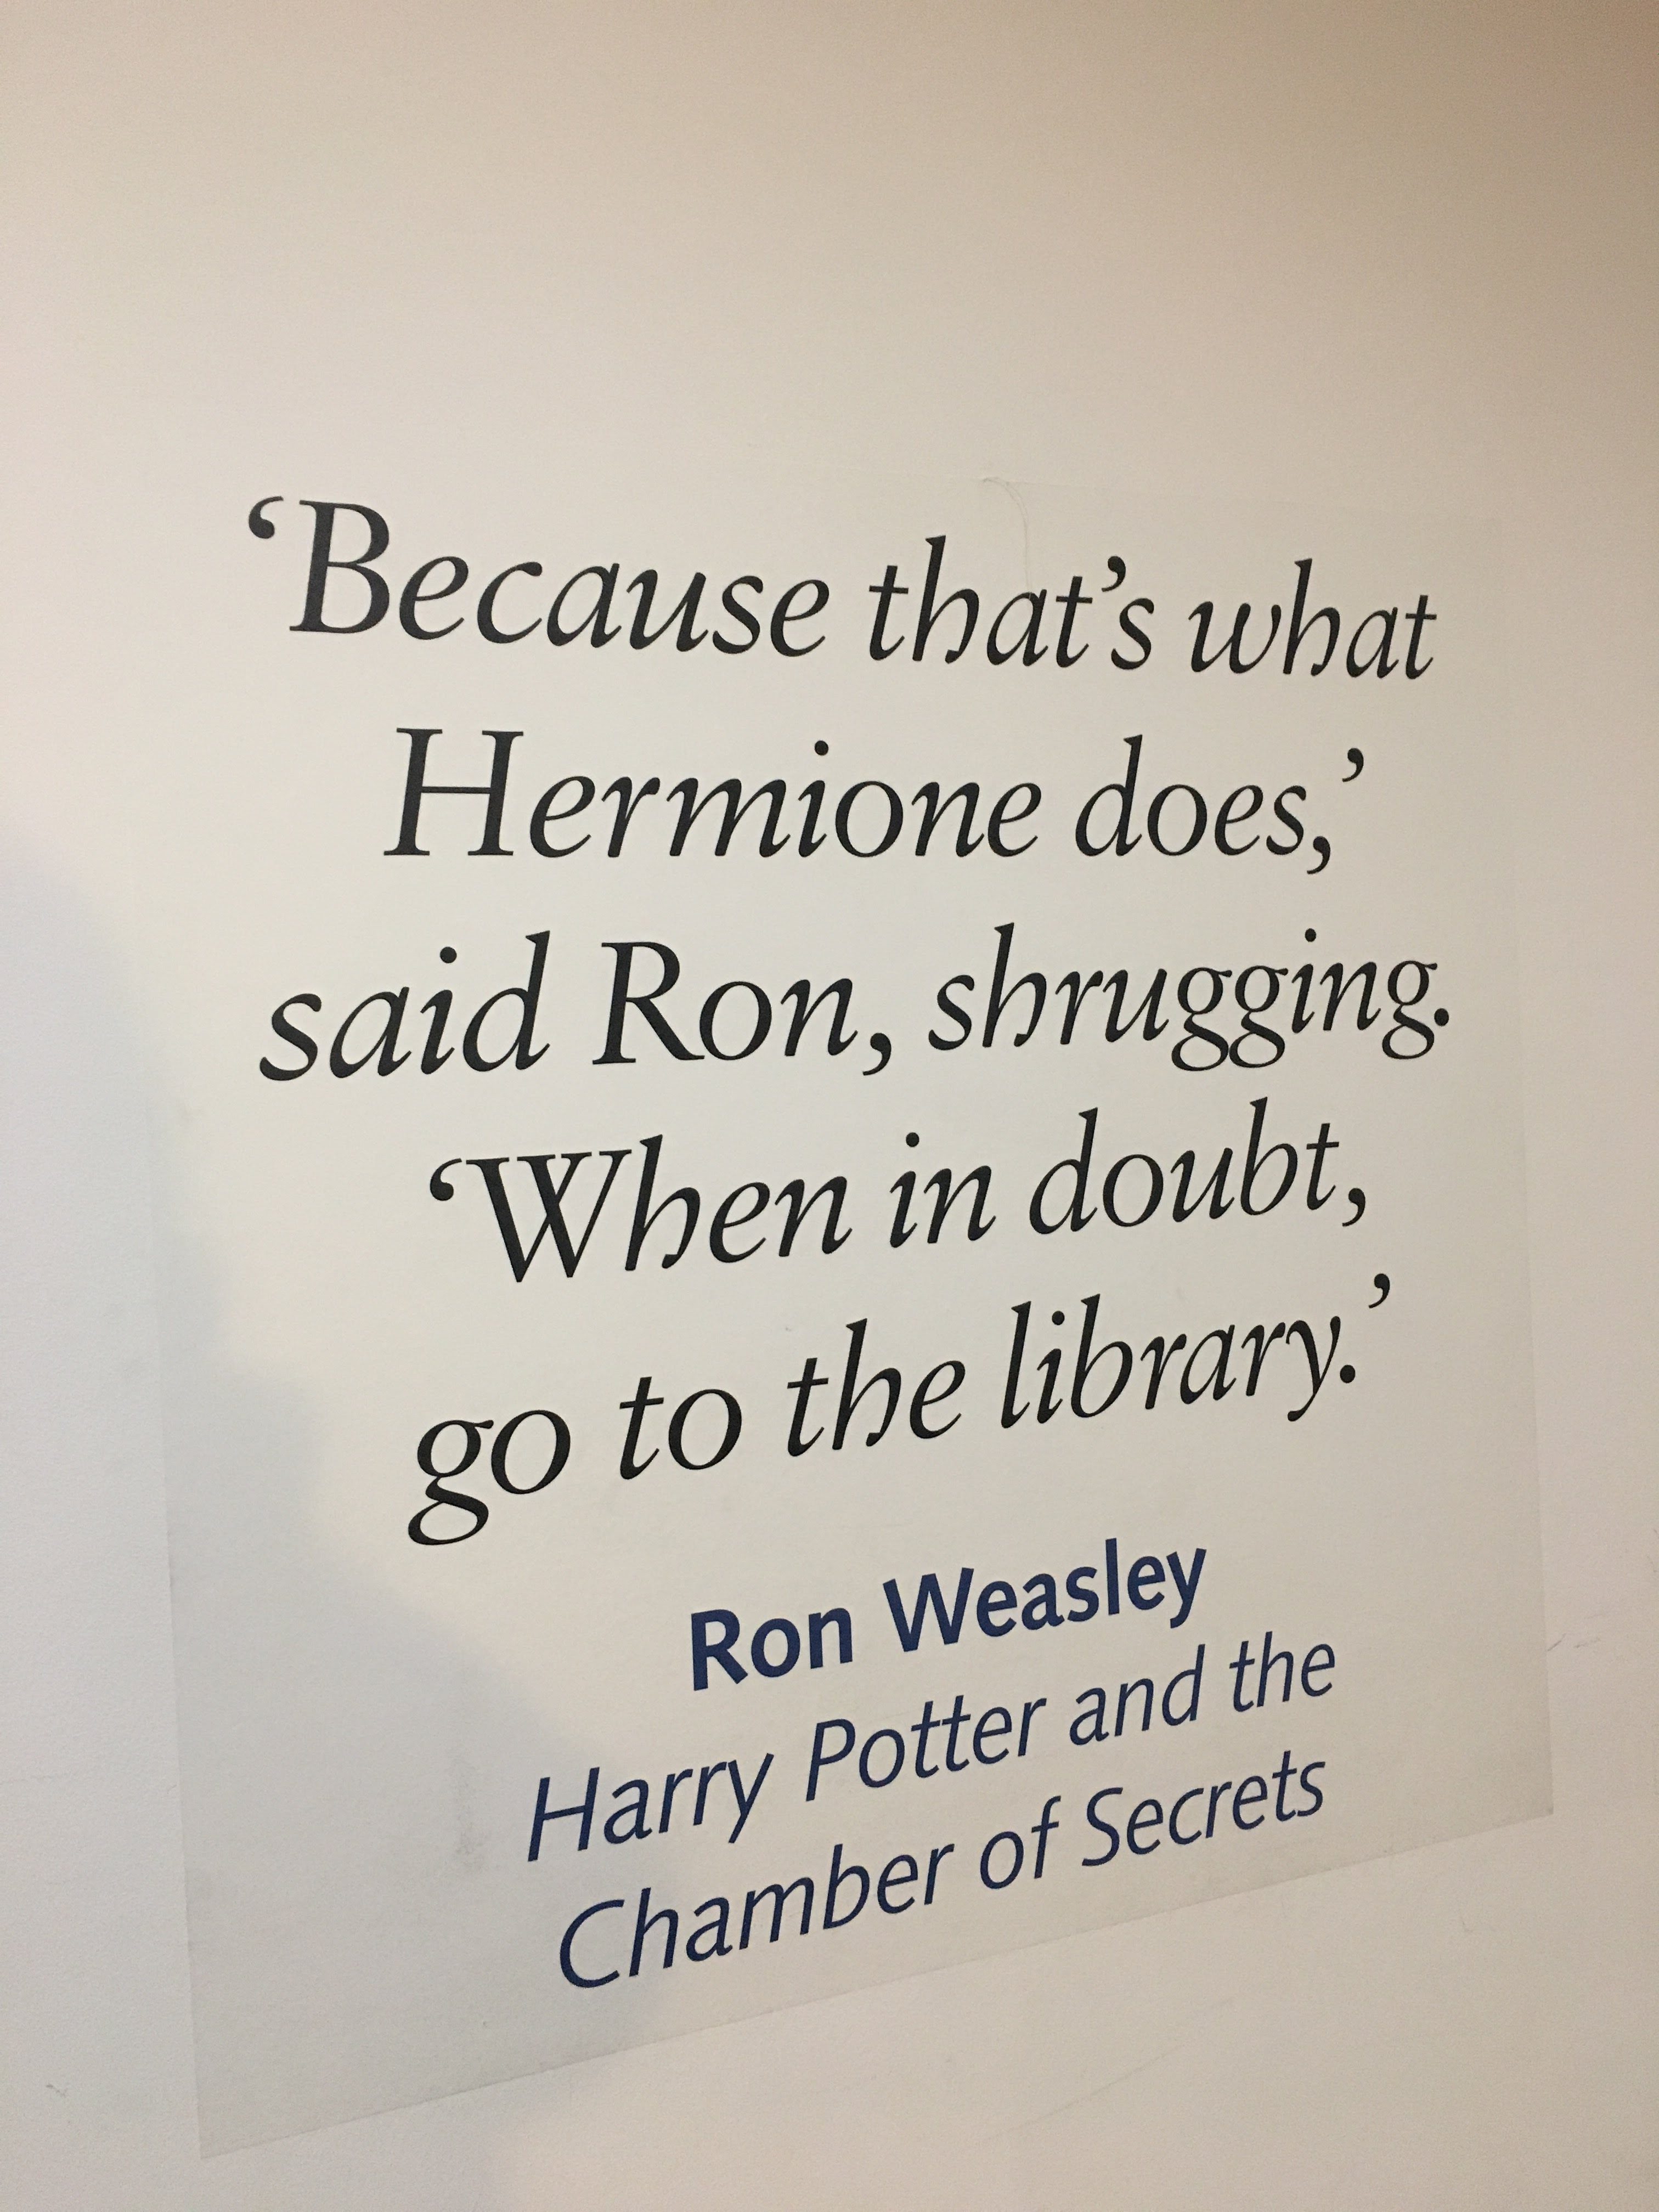 Ron Weasley quote on a wall